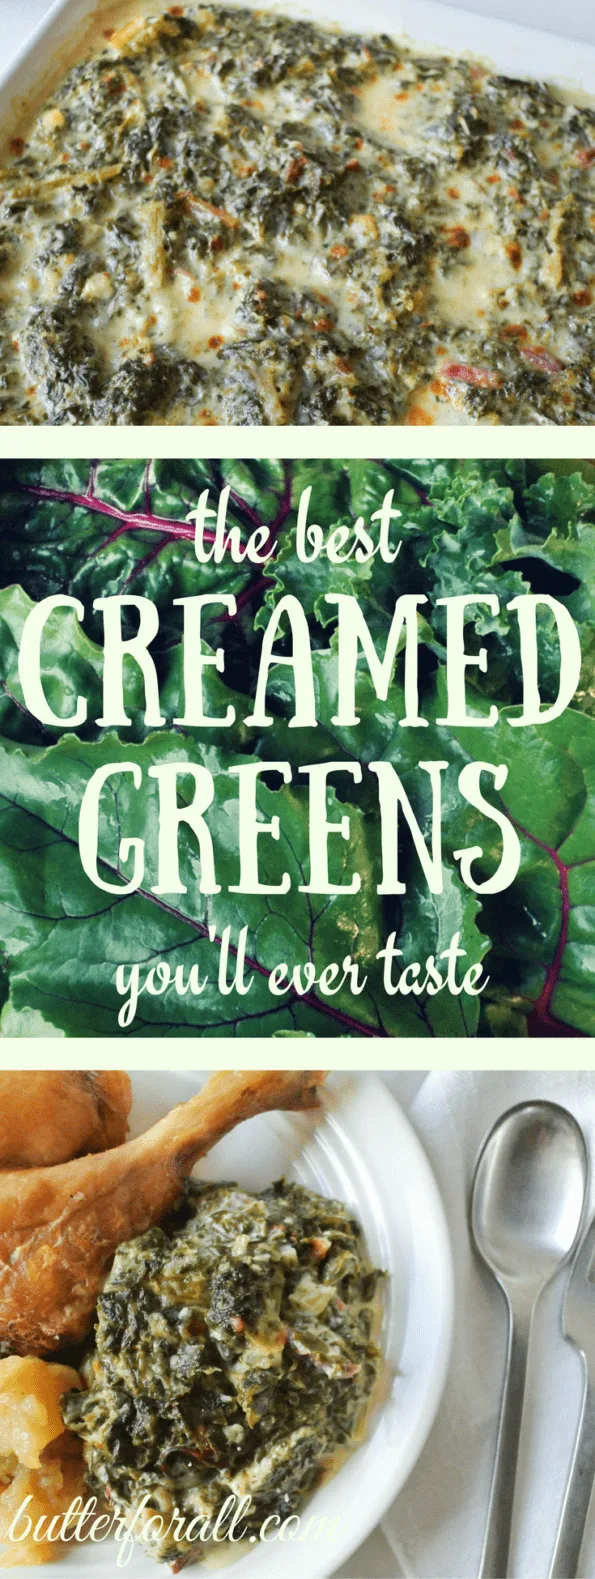 A collage of creamed greens with text overlay.